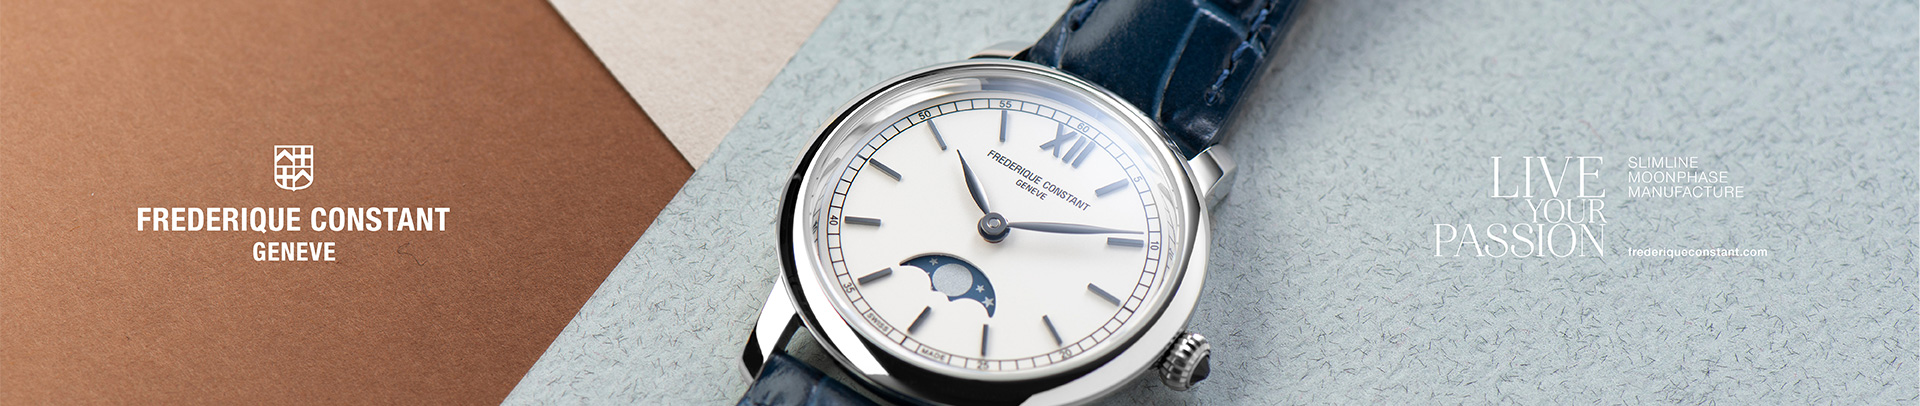 Frederique Constant | Material: Stainless Steel | Functions: 